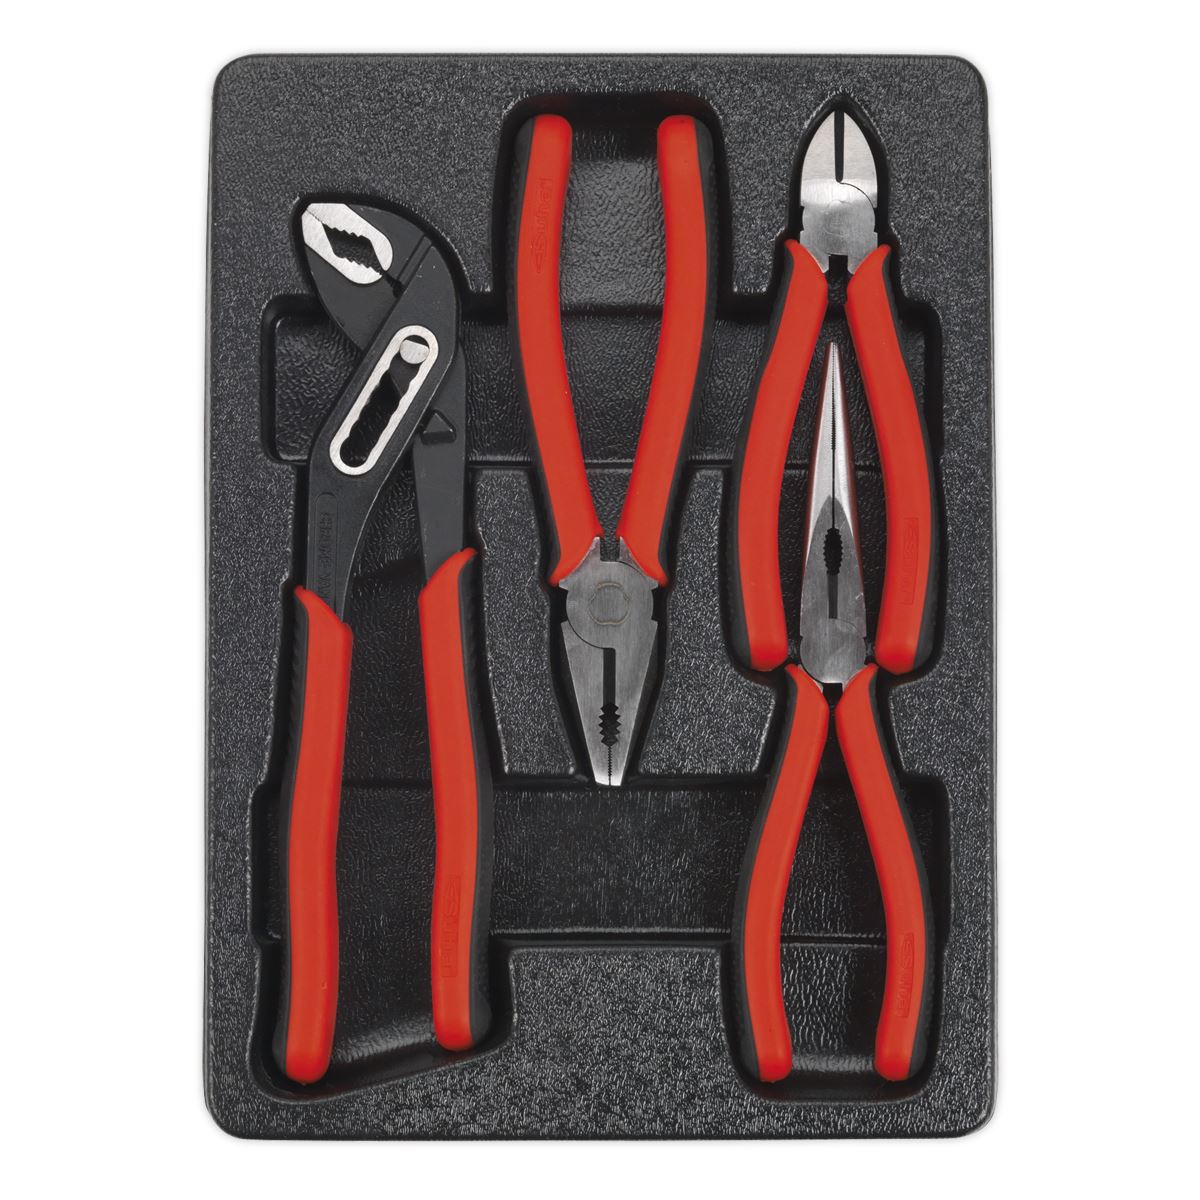 Sealey Premier Pliers Set Combi Water Pump Side Cutting Long Nose Serrated 4pc